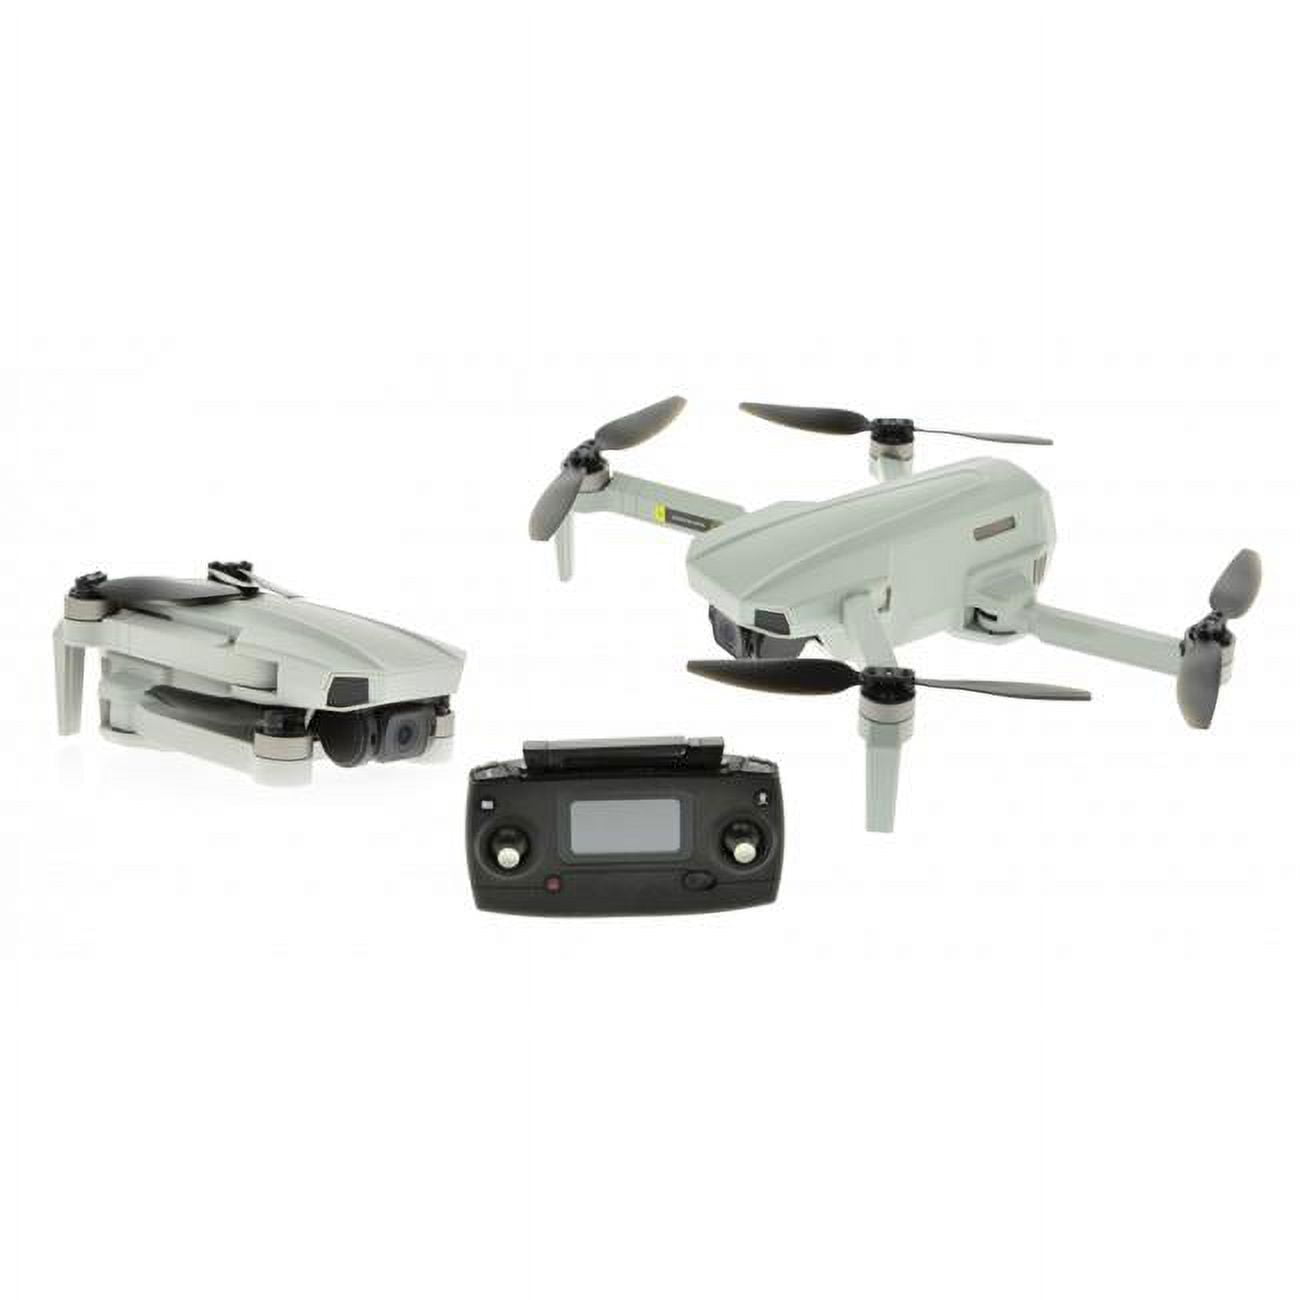 Picture of CIS-Associates B19W-4k Small Foldable Brushless GPS Drone